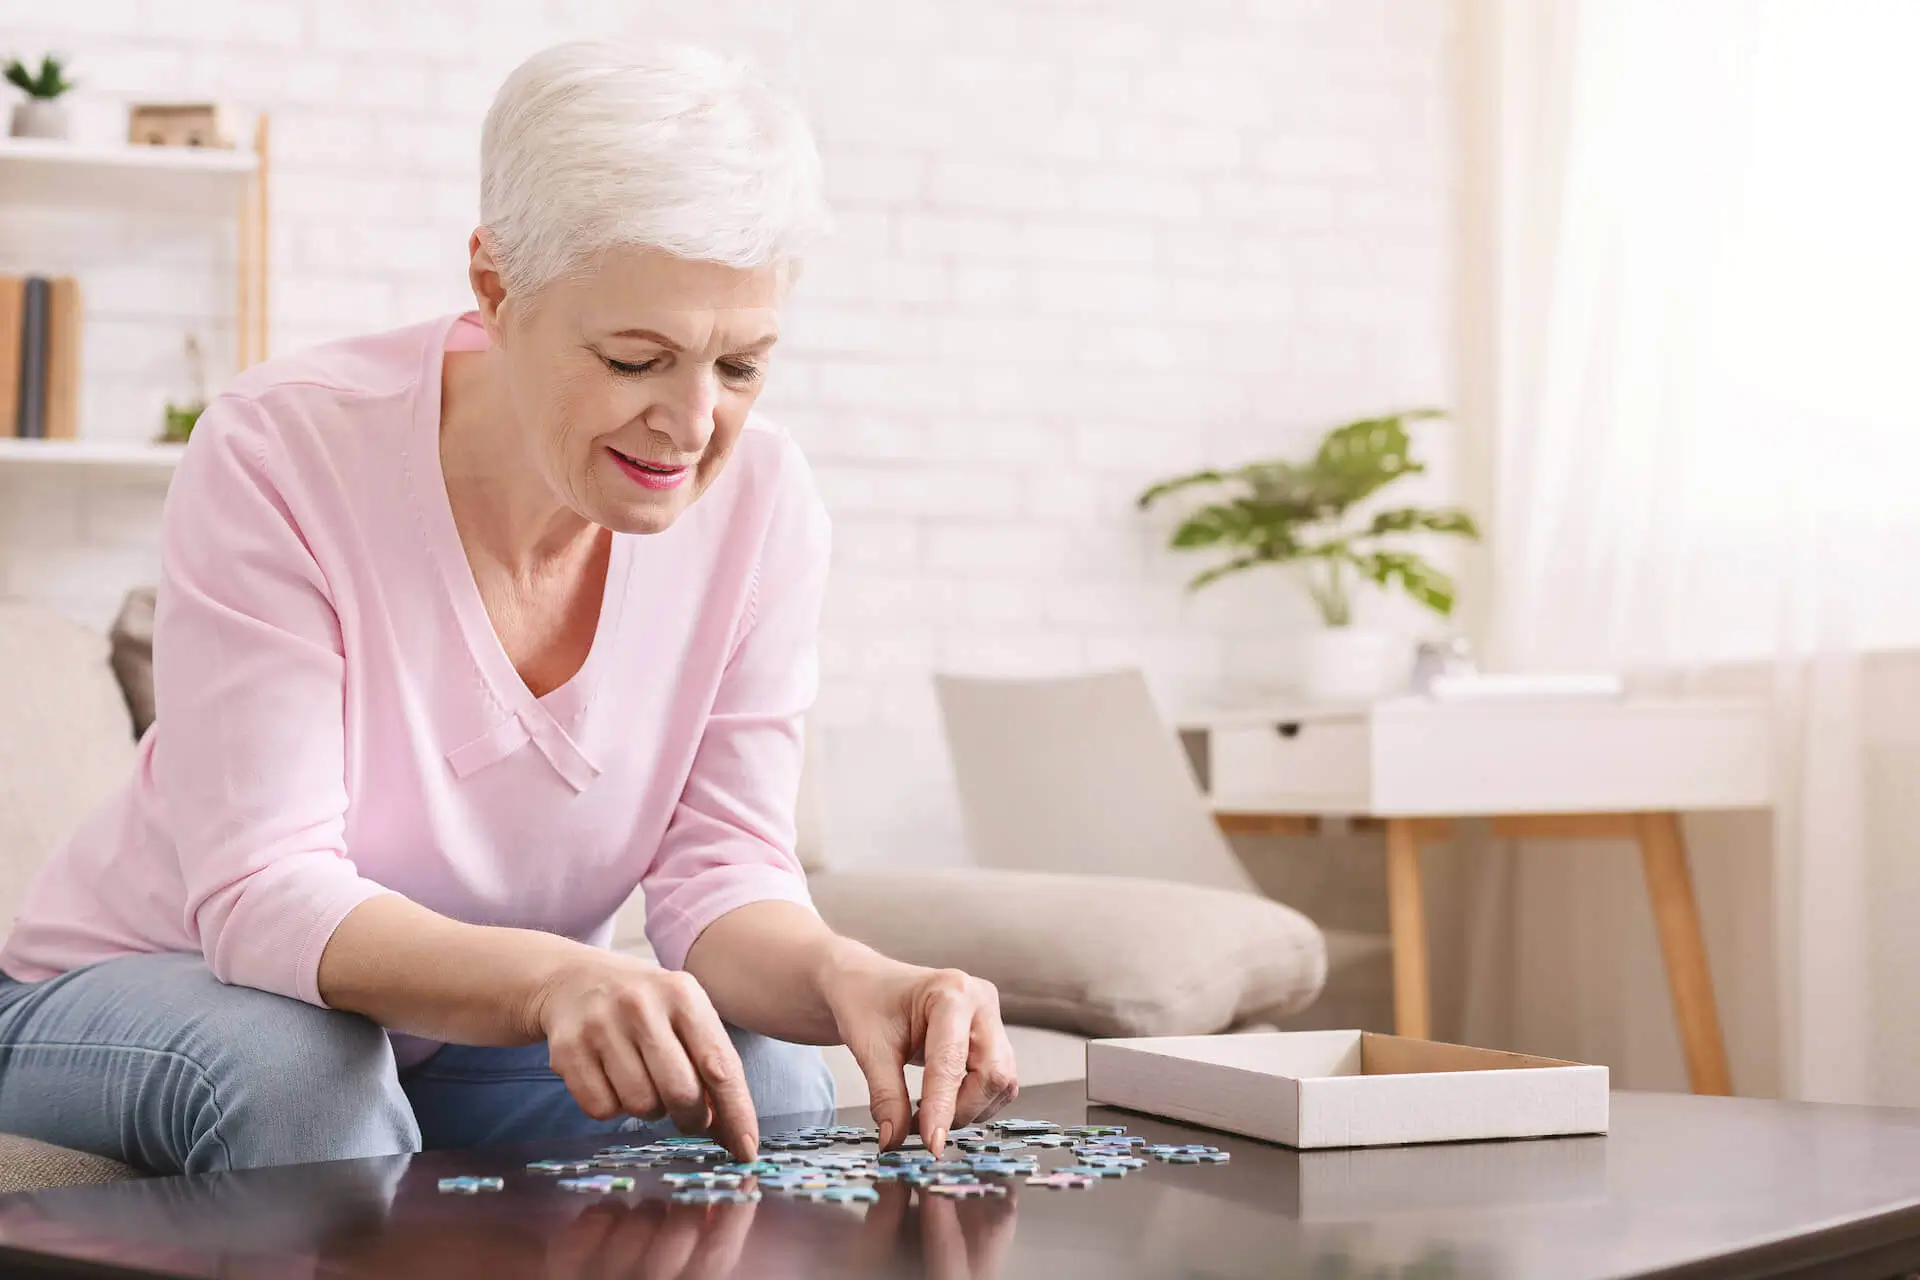 Activity can improve brain function. Elderly woman sitting at table and sorting jigsaw puzzle pieces, free space